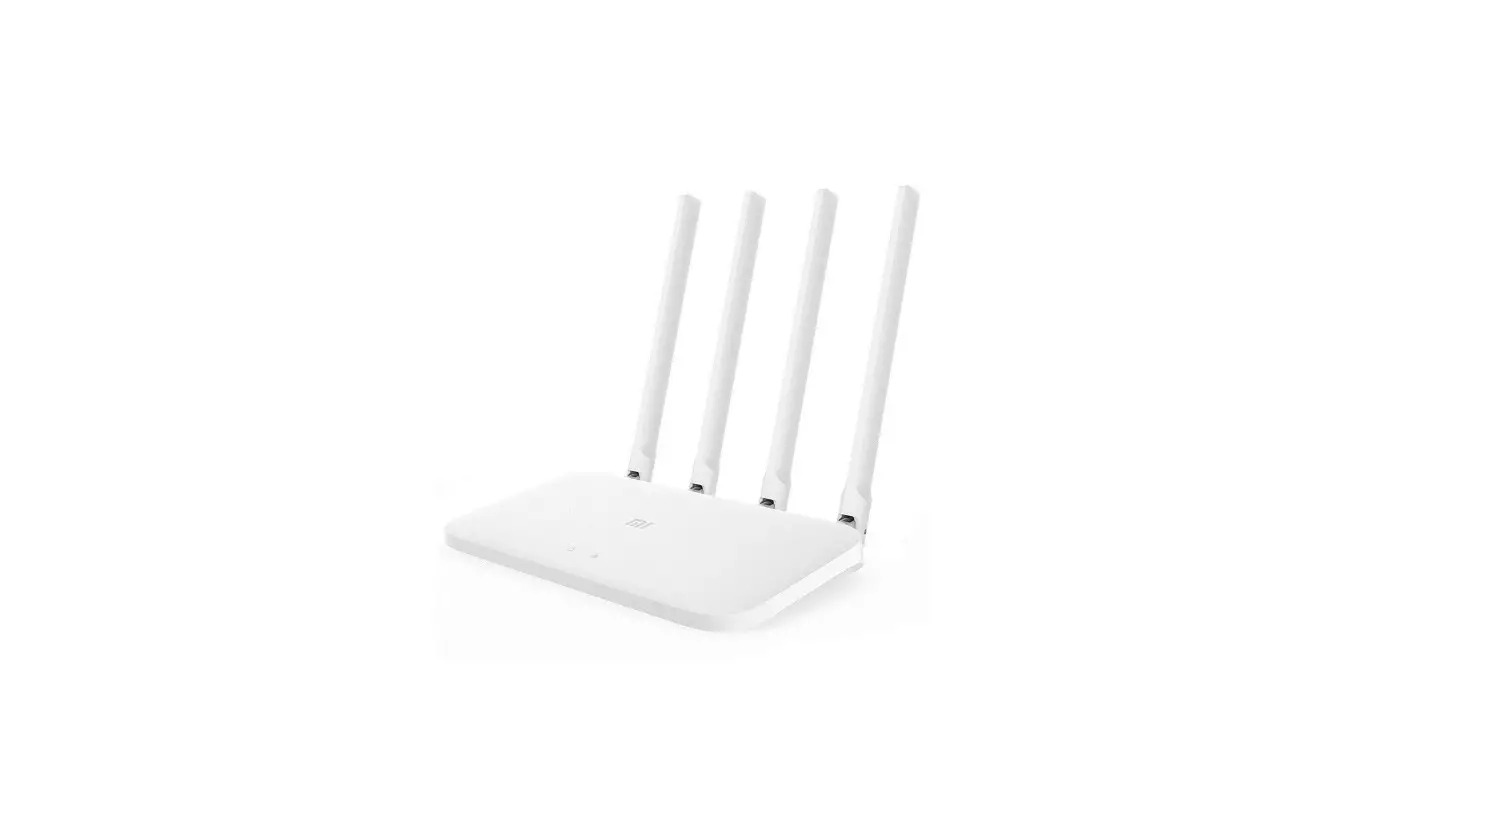 Mi Router 4A 2.4GHz 5GHz WiFi 1200Mbps WiFi Repeater